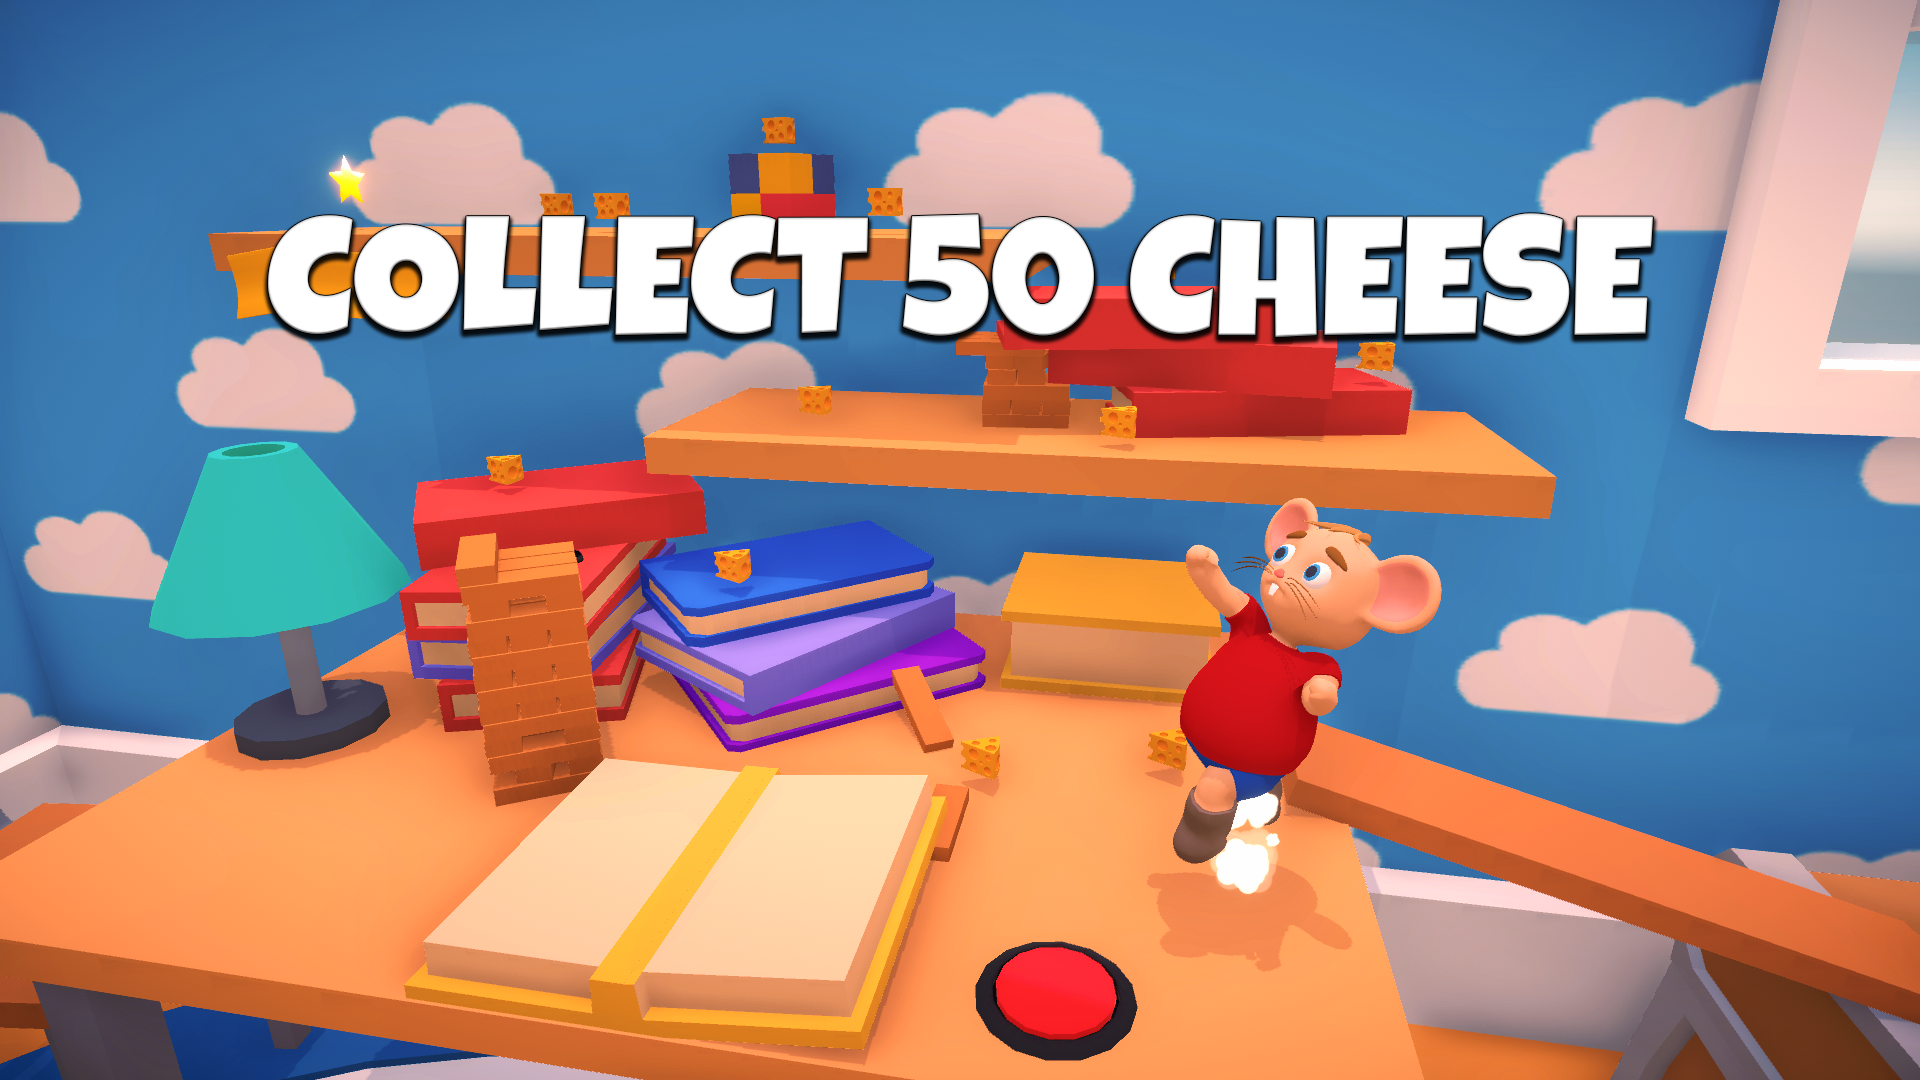 Collect 50 Cheese